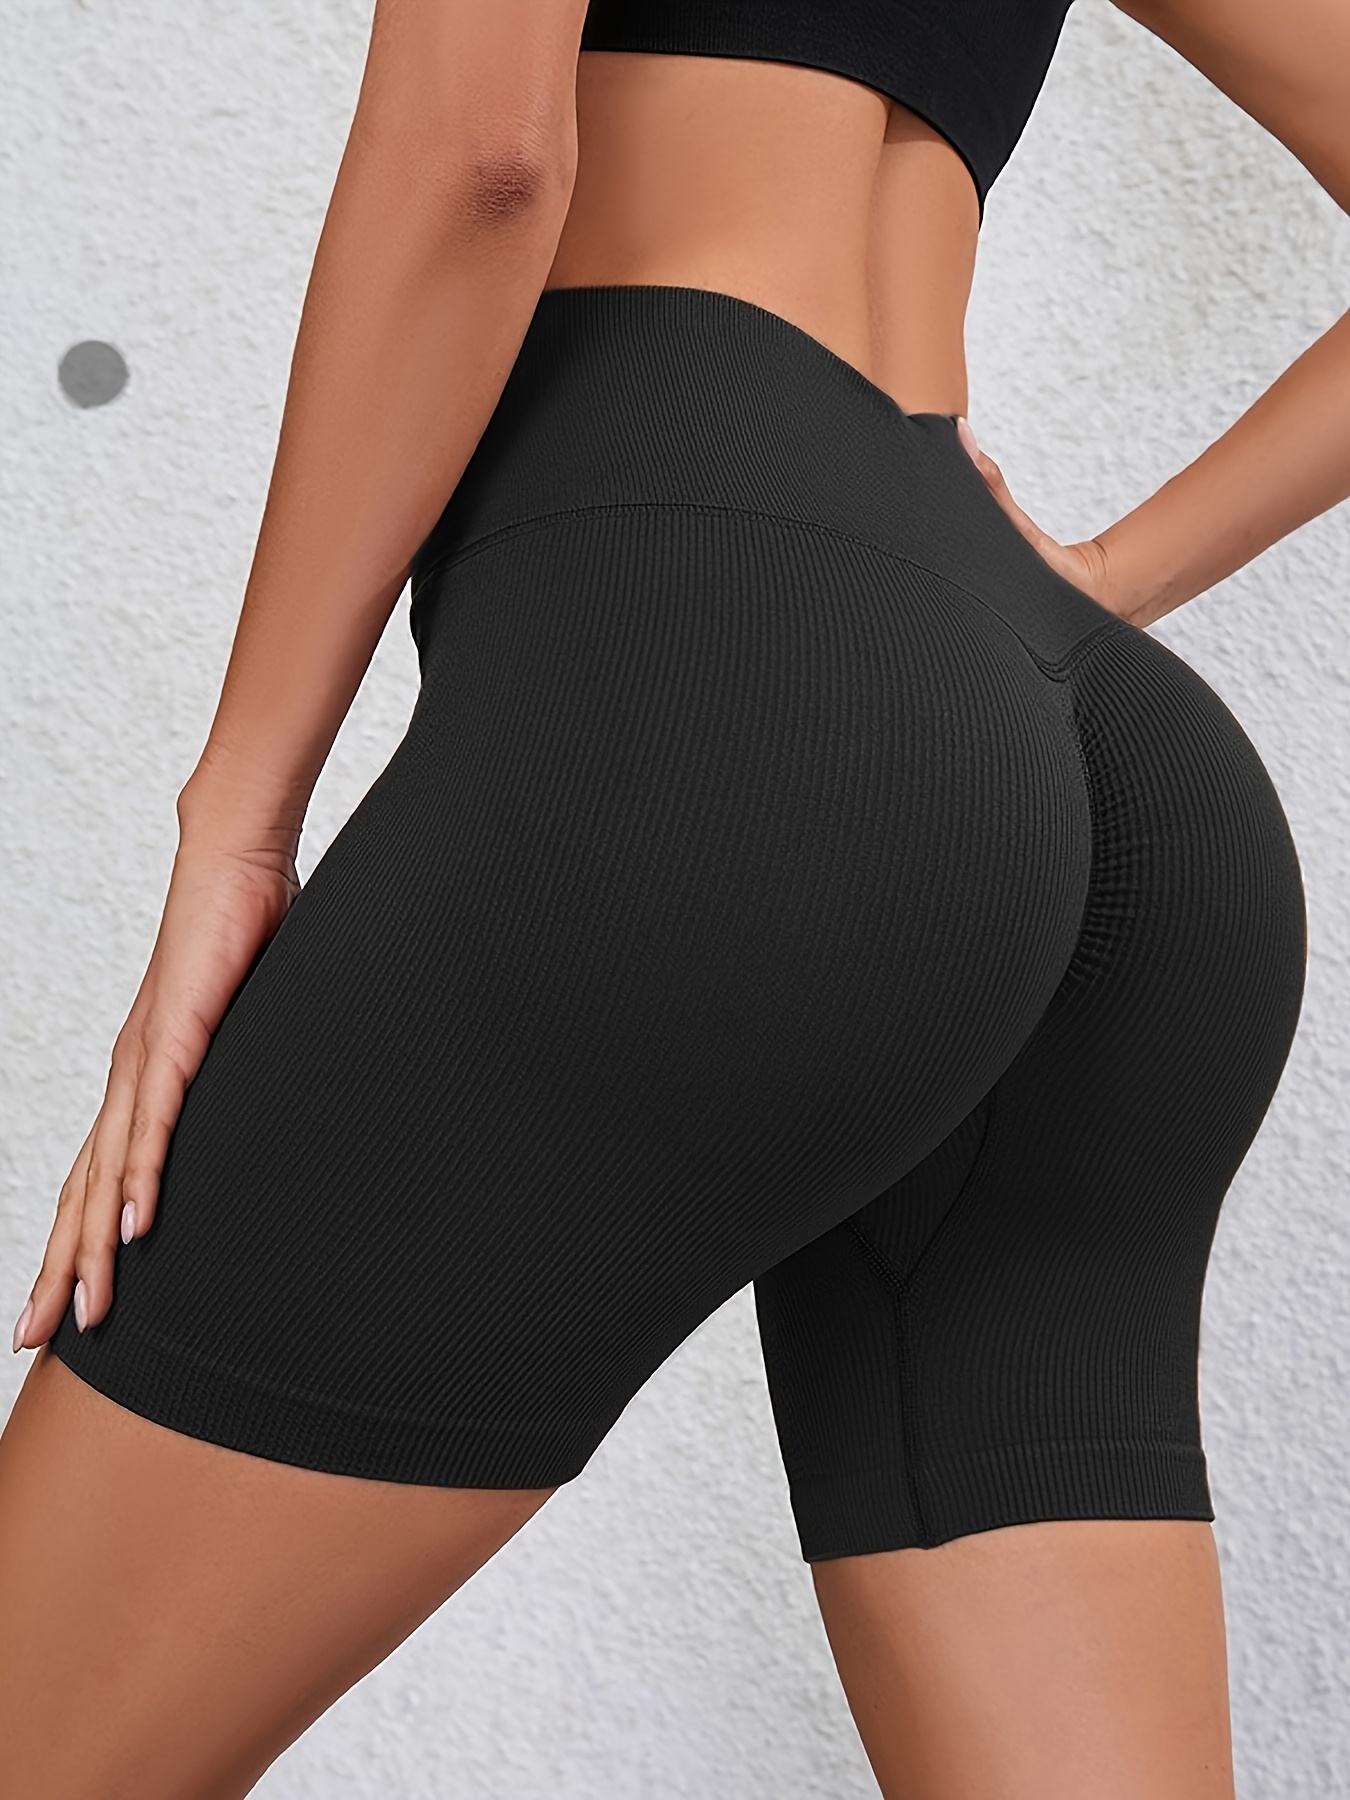 Best Deal for Women's High Waist Tight Yoga Shorts Side Large Hollow Sexy